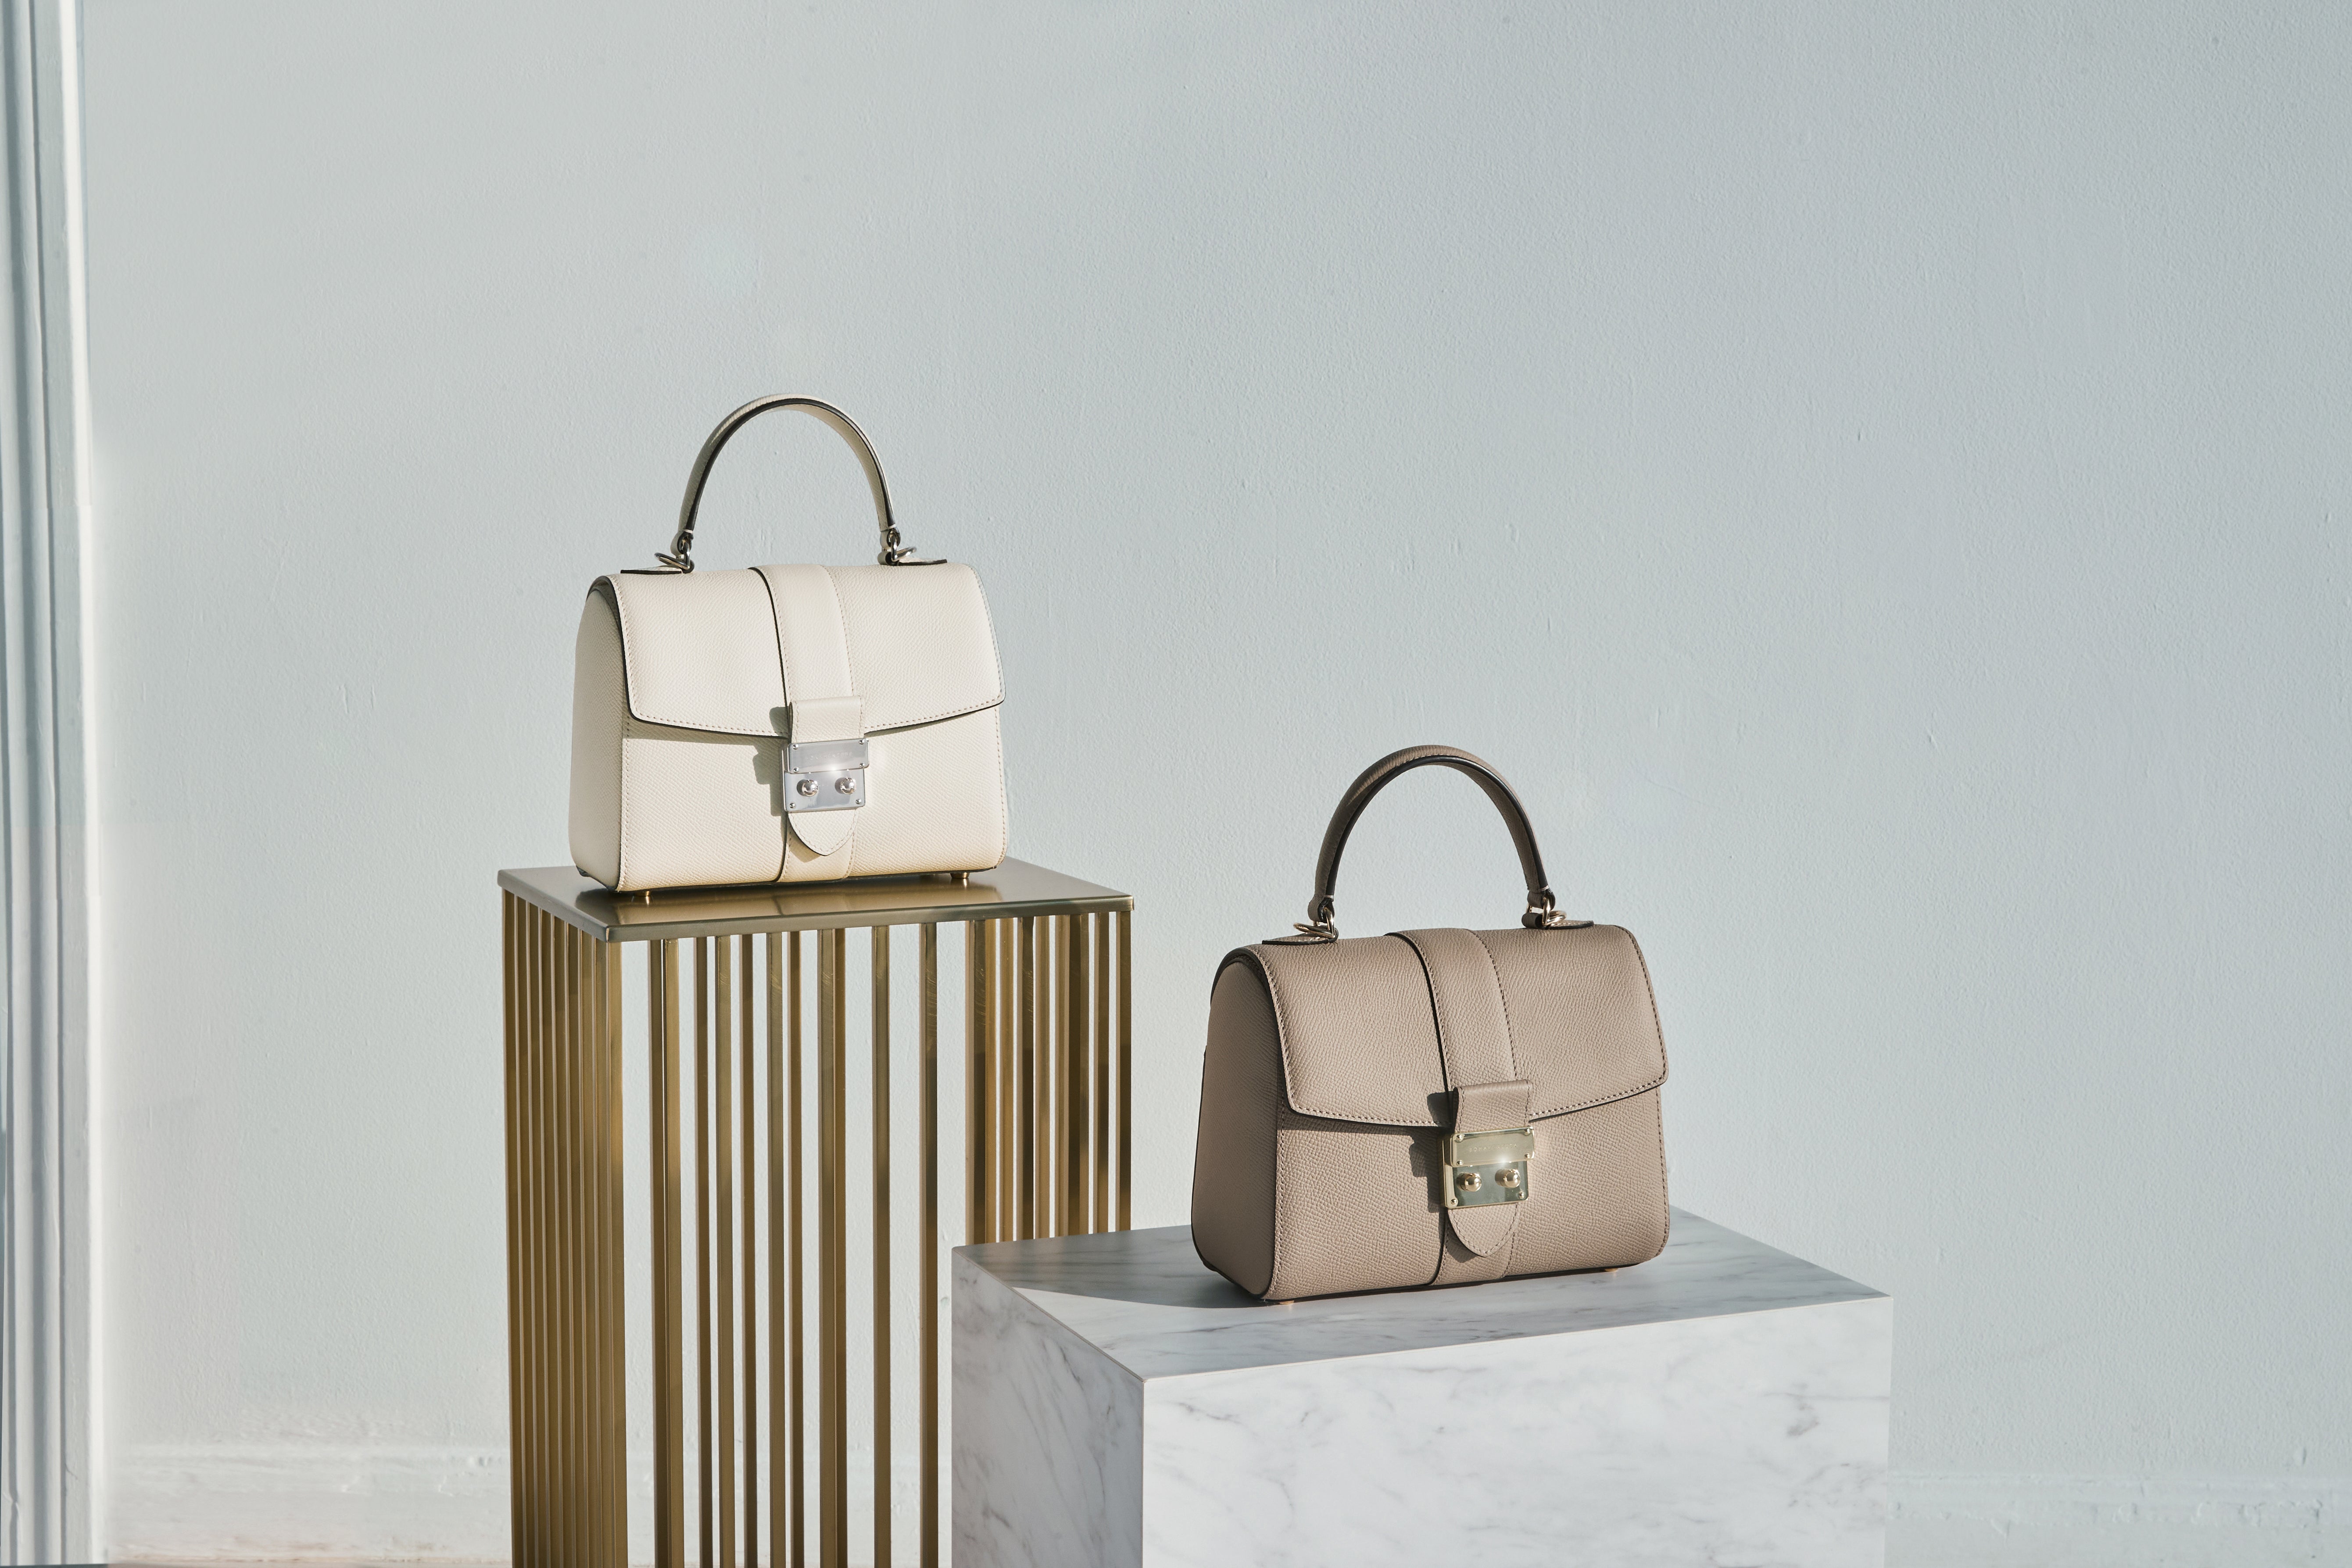 The new iconic Anna Bag by BONAVENTURA made of noble Noblessa leather in two color variations.